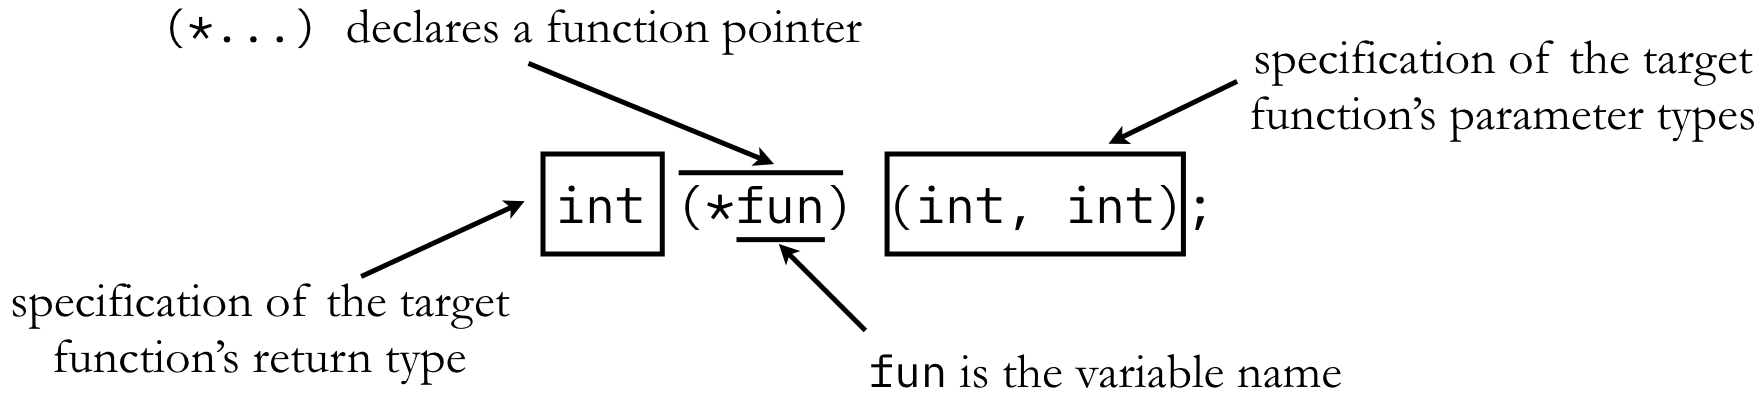 Components of a function pointer declaration